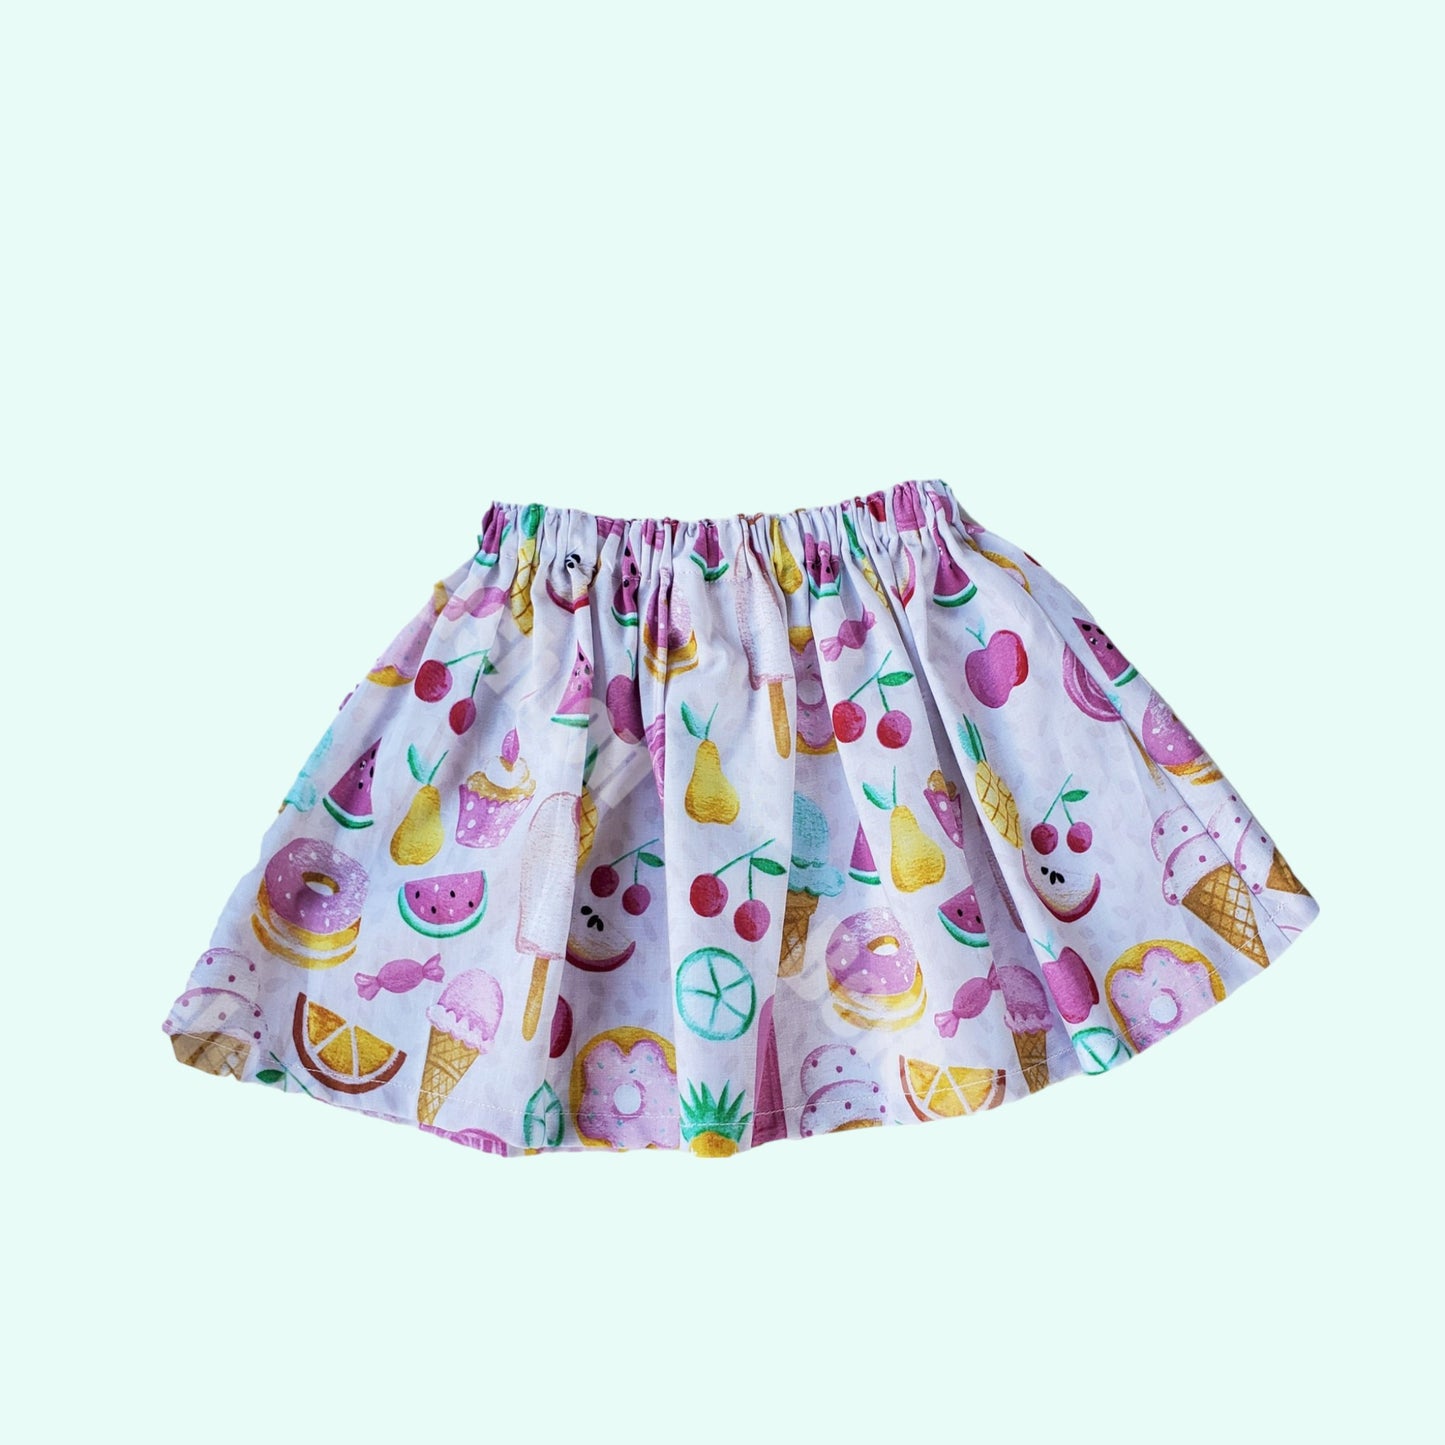 Candyland birthday outfit | Girls onesies outfit | Age girls outfit | Girls outfit | Girls First Birthday  | Ice cream girls outfit